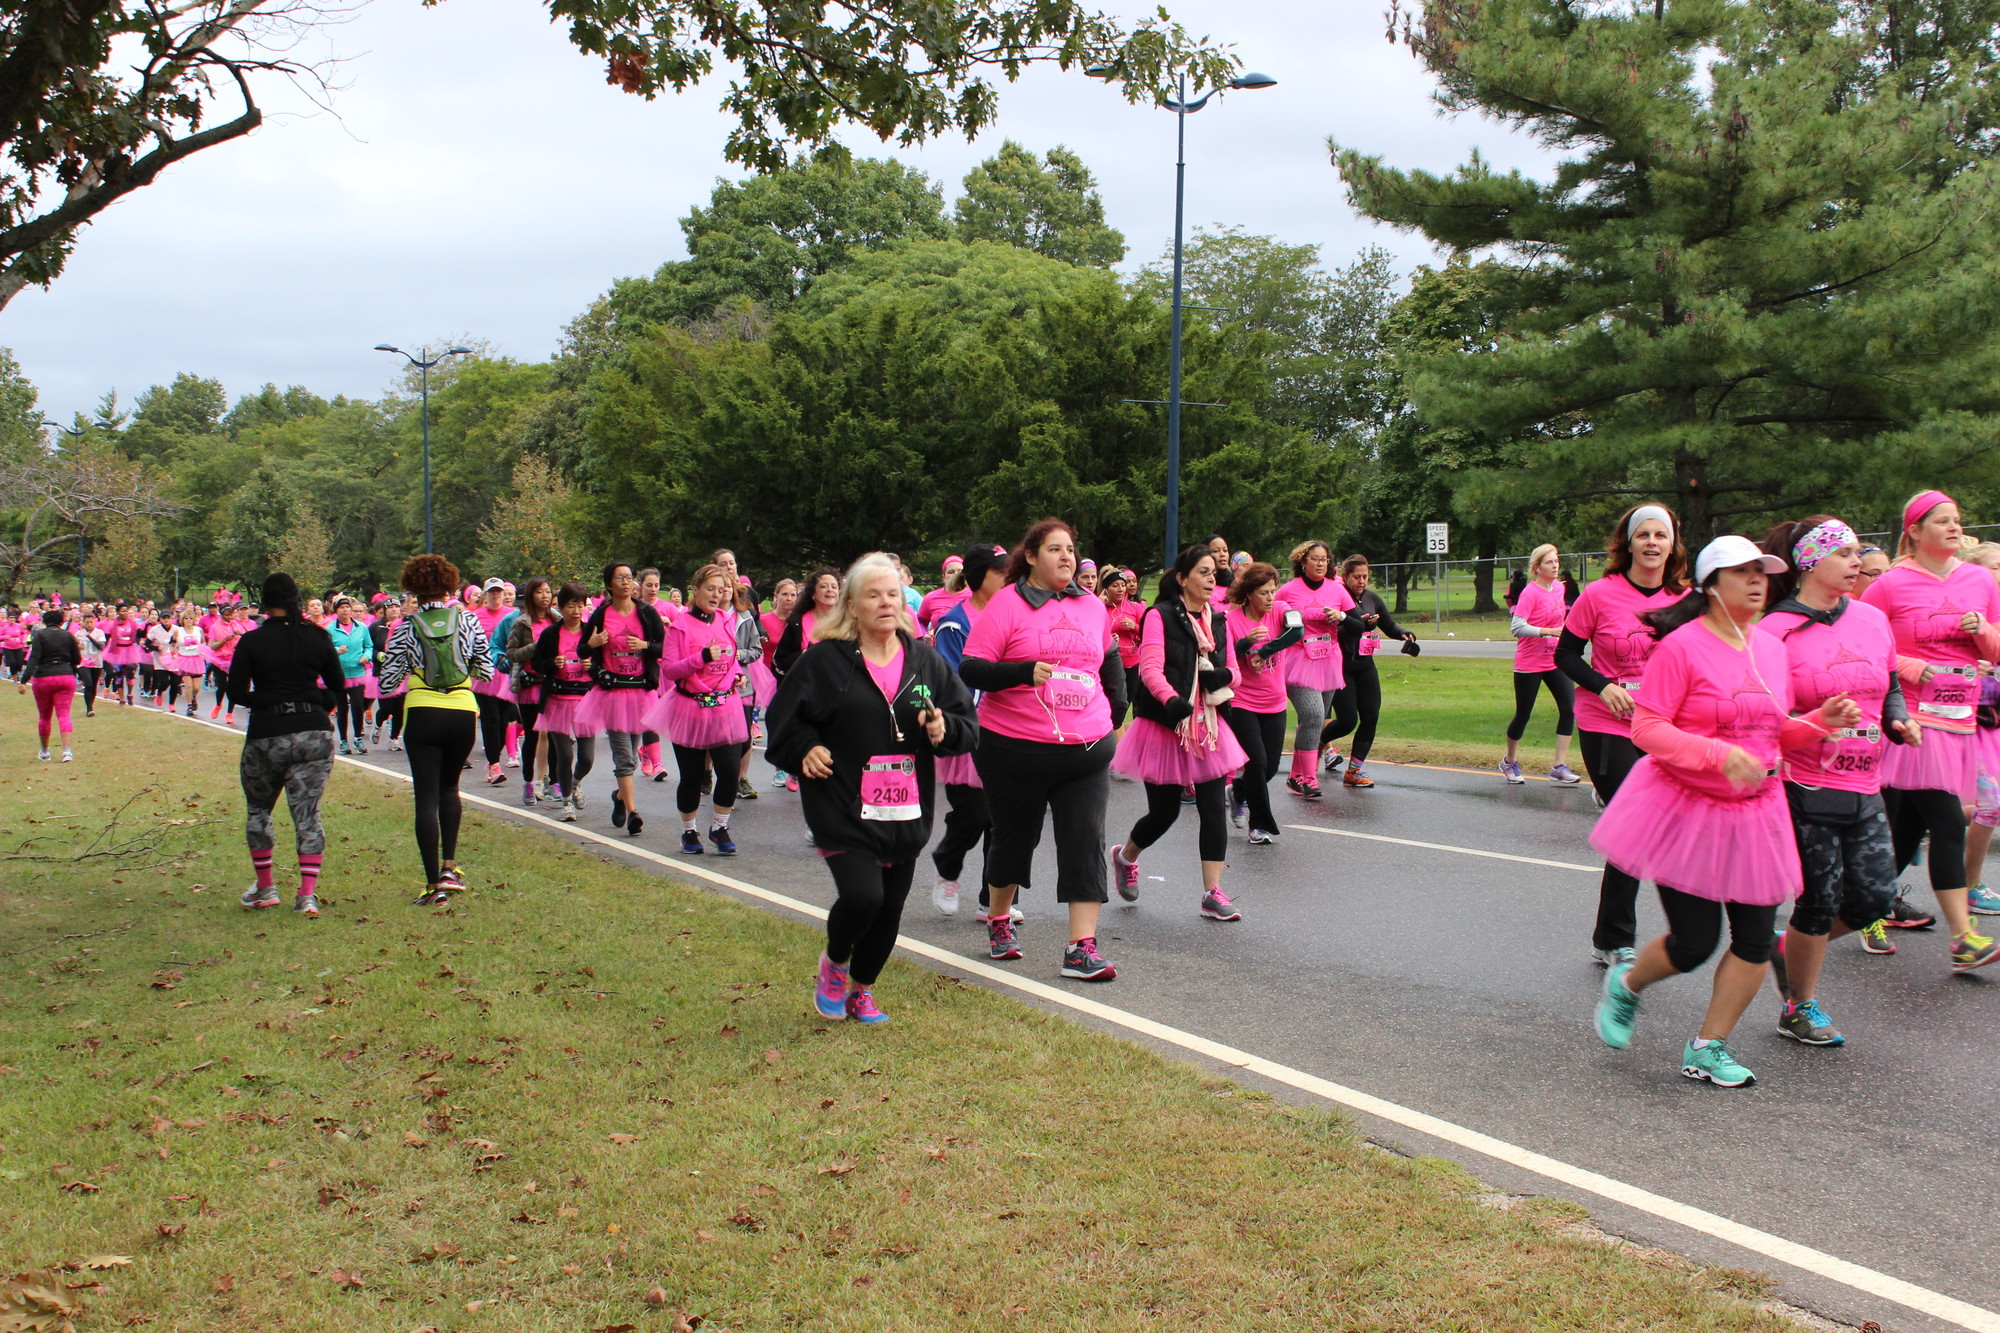 The 2015 Divas Run was held in Eisenhower Park on Oct. 4. The first wave of runners crossed the starting line as a sea of pink, glitter, tutus and determination.